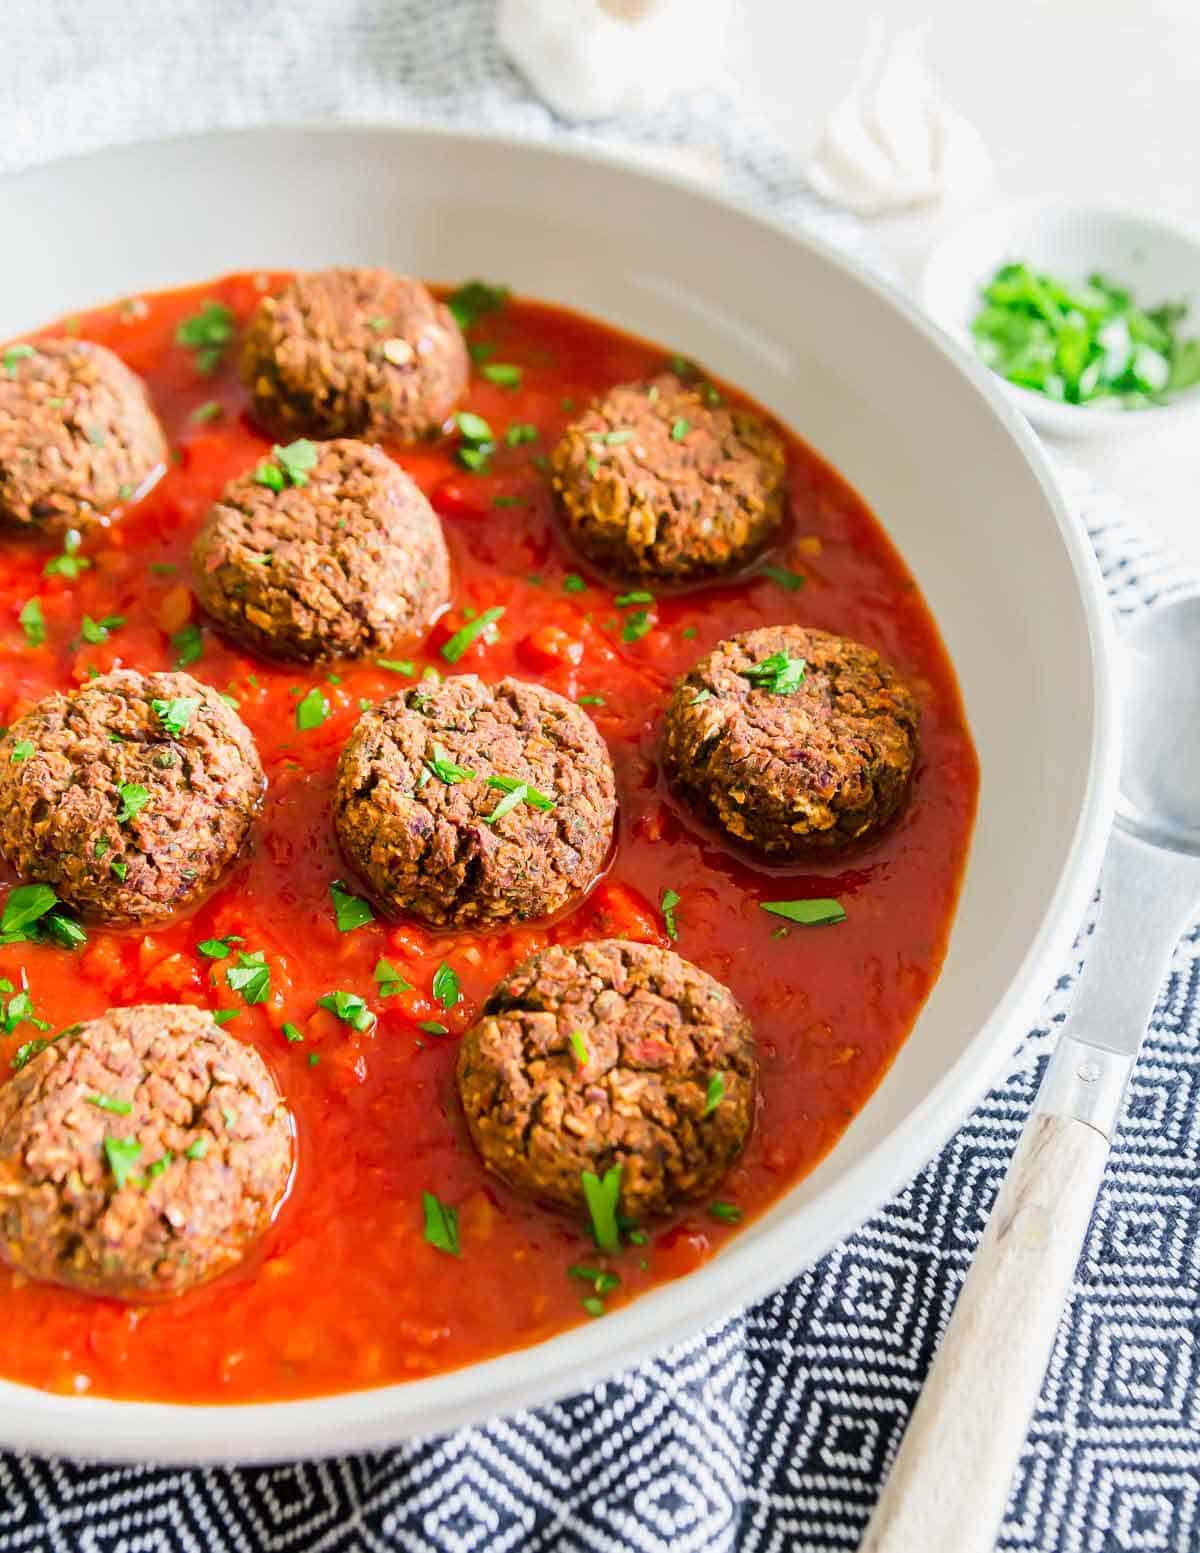 Looking for a vegan way to enjoy meatballs? Try these easy gluten-free, vegan black bean "meatballs" over pasta with your favorite tomato sauce.